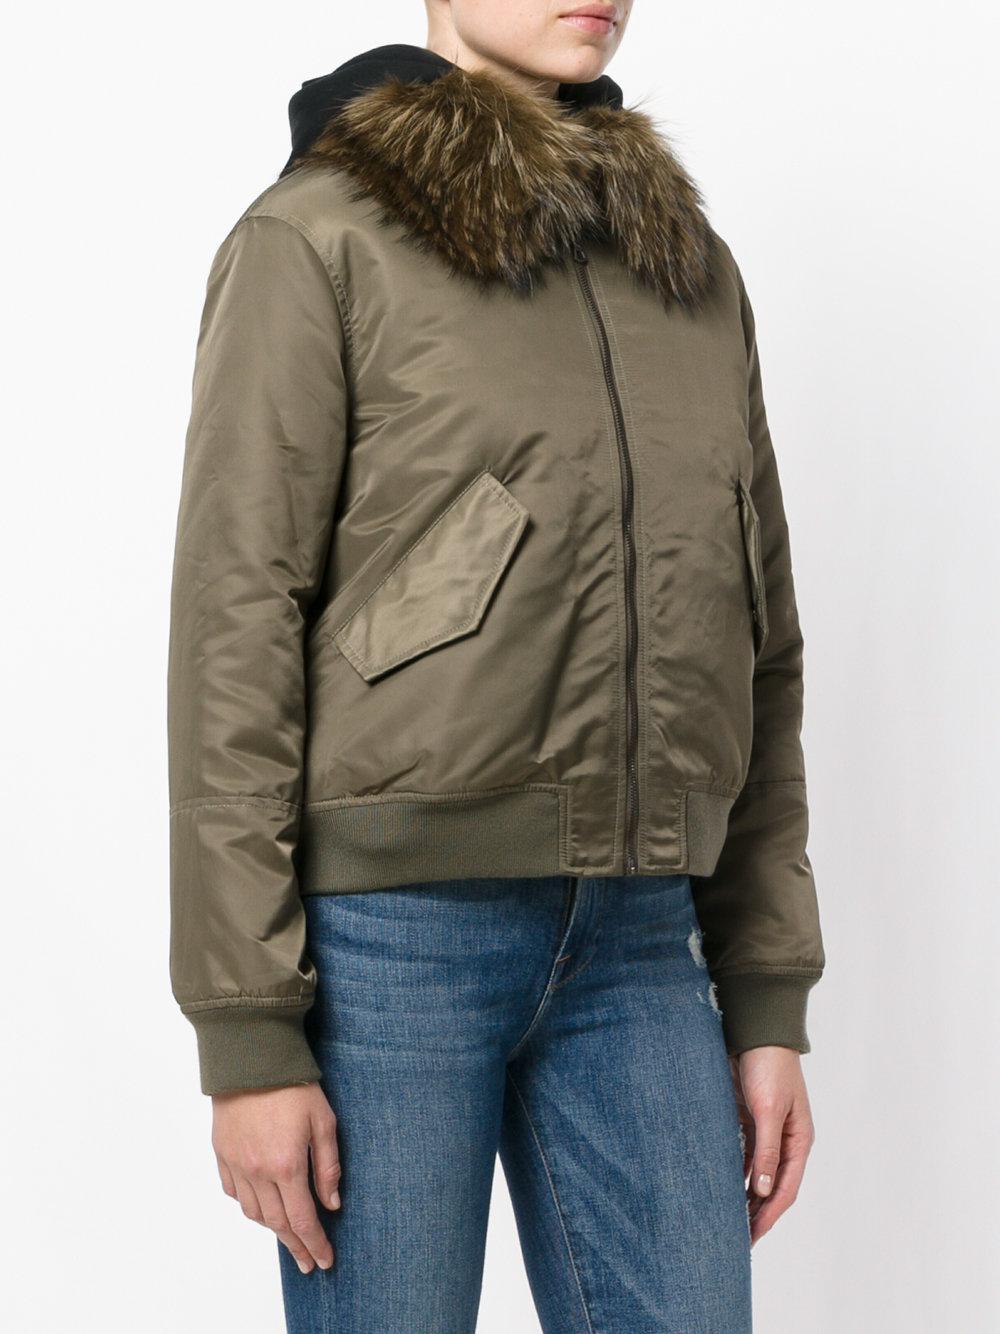 Lyst - Army By Yves Salomon Four Lapin Jacket in Green